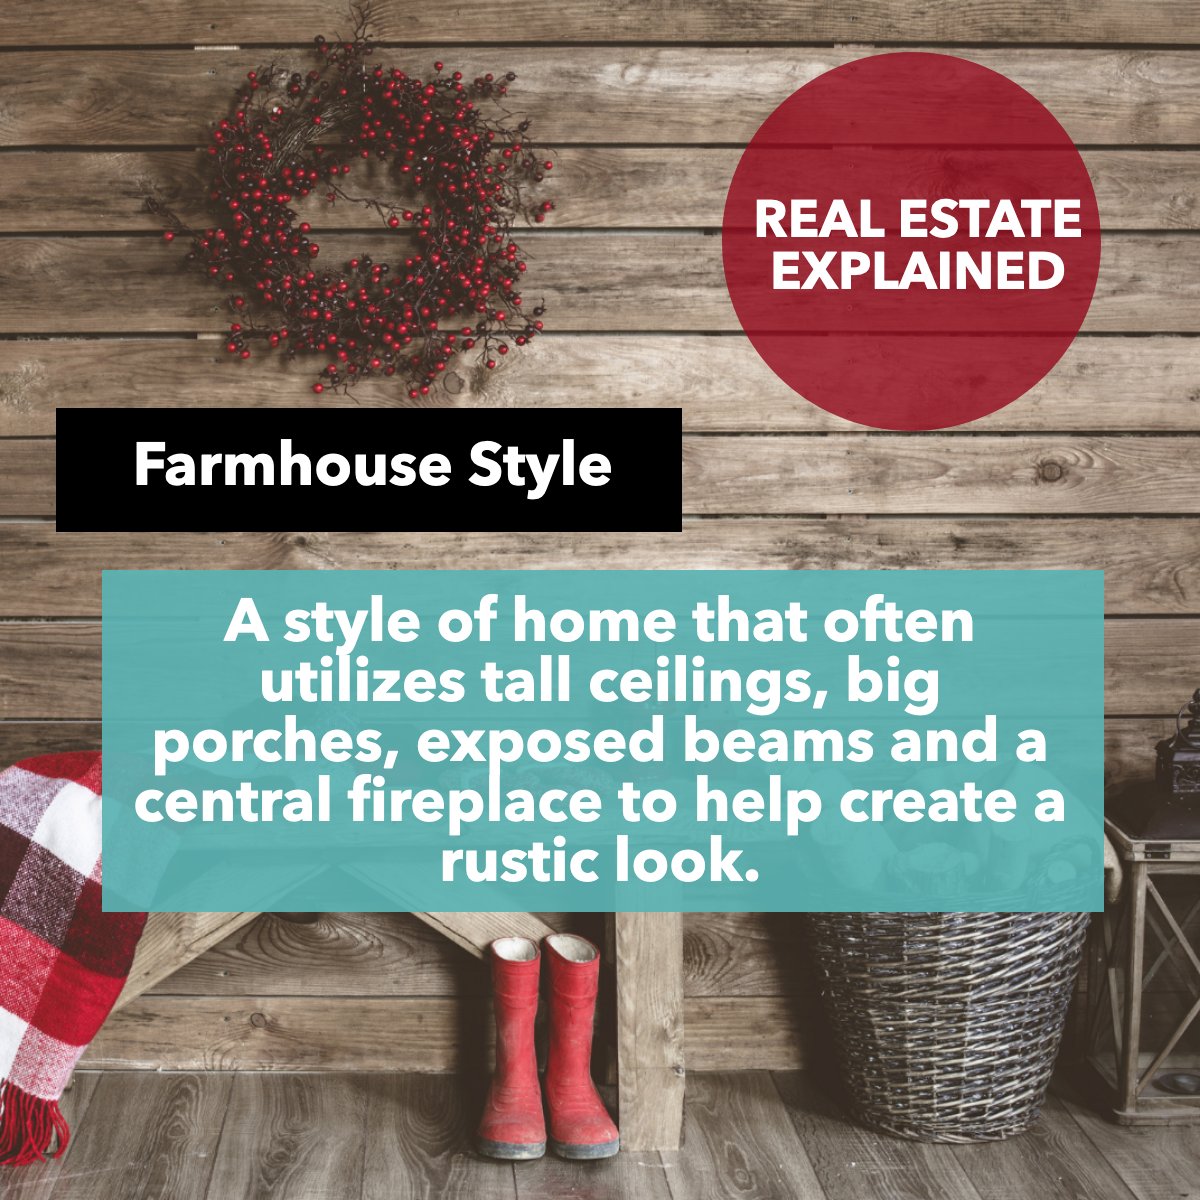 Did you know what a Farmhouse Style is? 🏡

Is this the type of house that you like?

#farmhousestylehome #farmhousestyledesign #farmhousestyleinspired #farmhouseismystyle
 #realestate #buy #purchase #firsttimehomebuyer #fha #chase #zillow #rockland #bergen